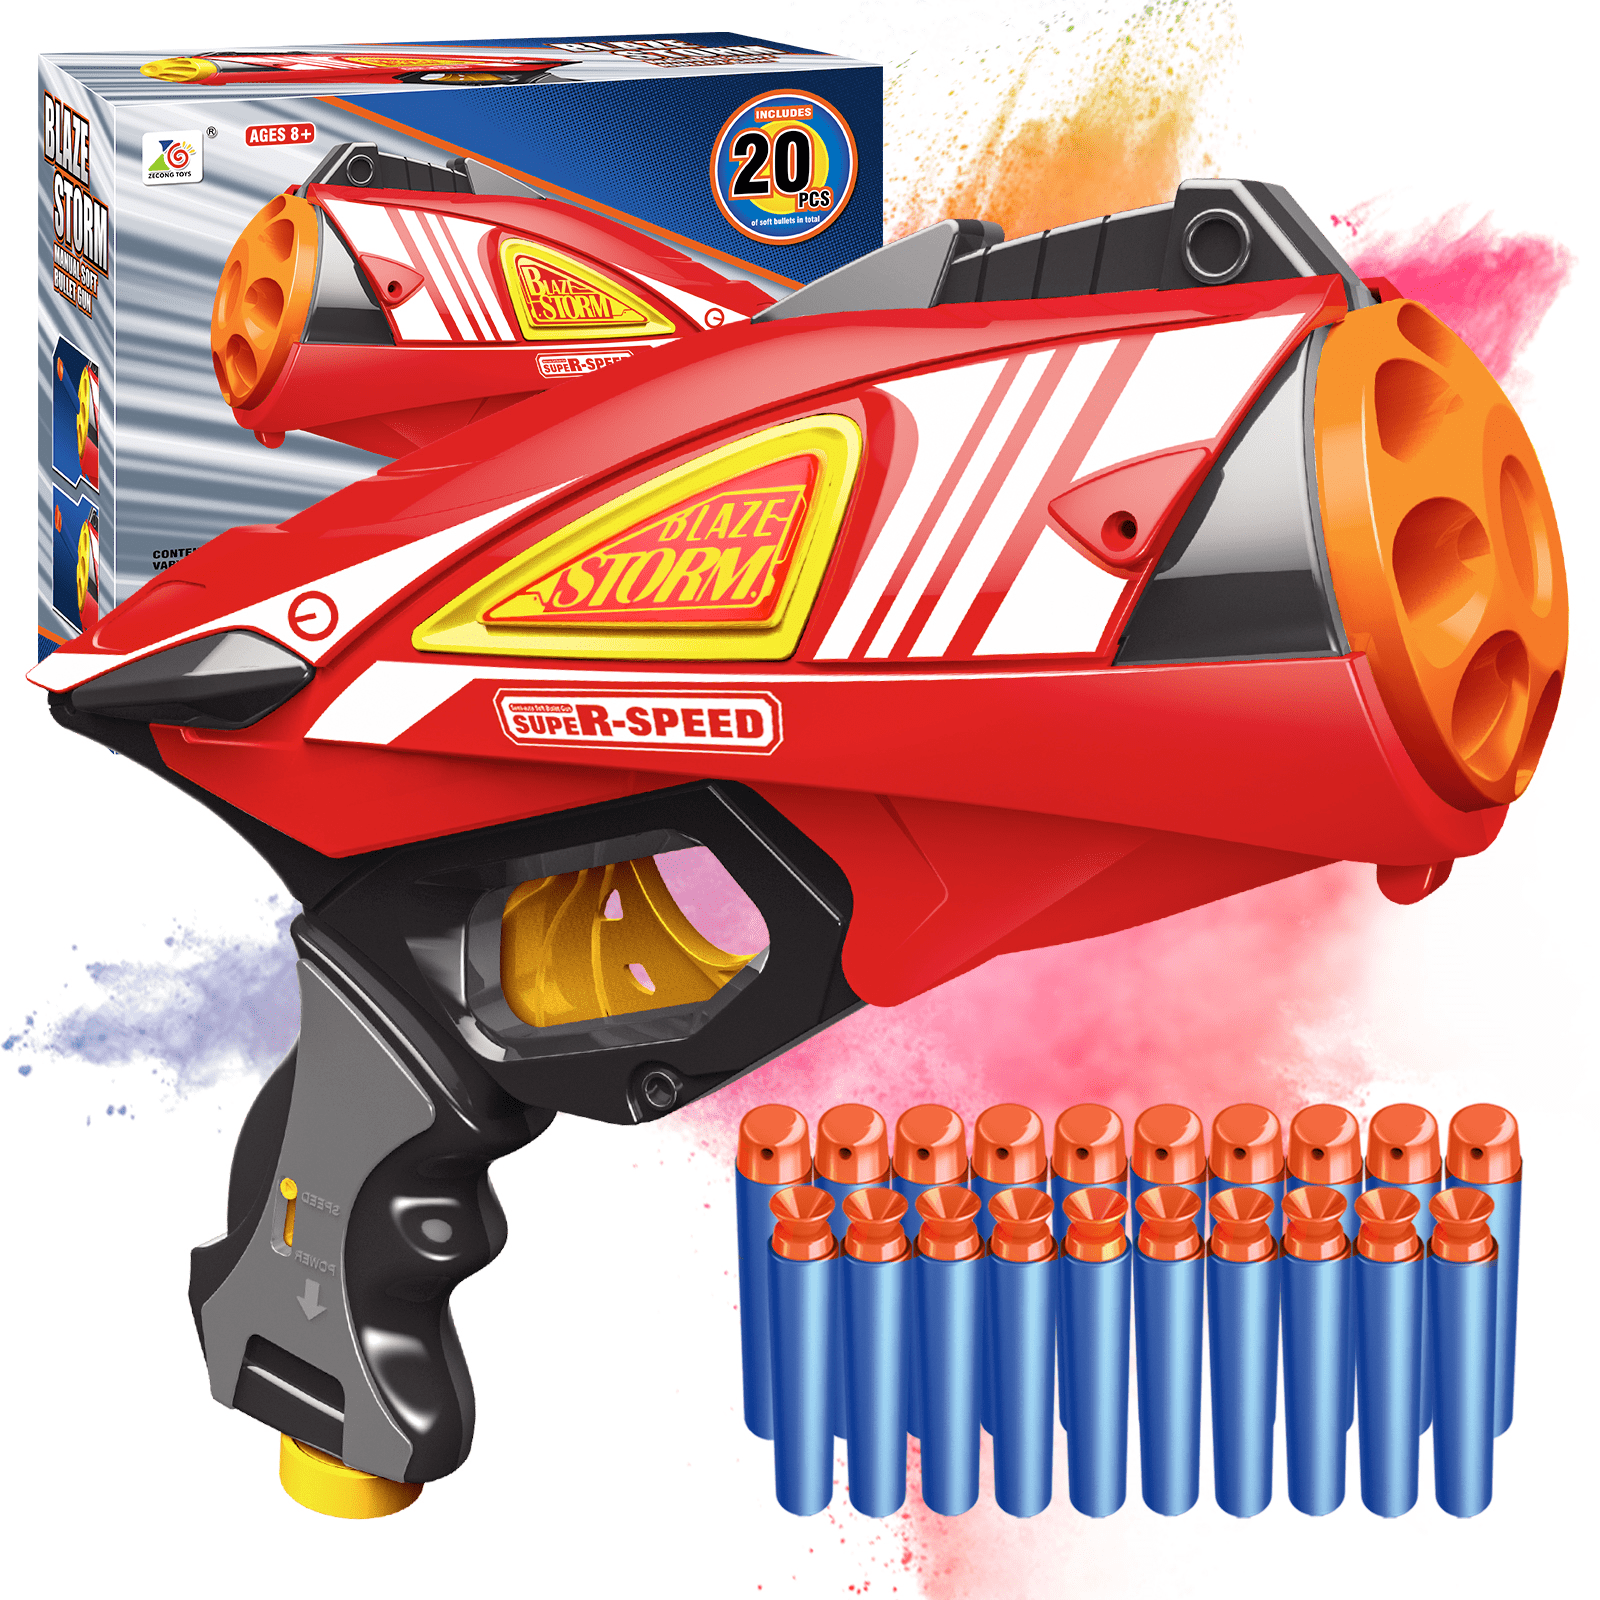 Toy Gun with Bullet, Blaster Toy for Boys, Darts Gun with 20 Pcs Soft Foam,  Outdoor Toys Gift for Girls Kids Ages 6+ 